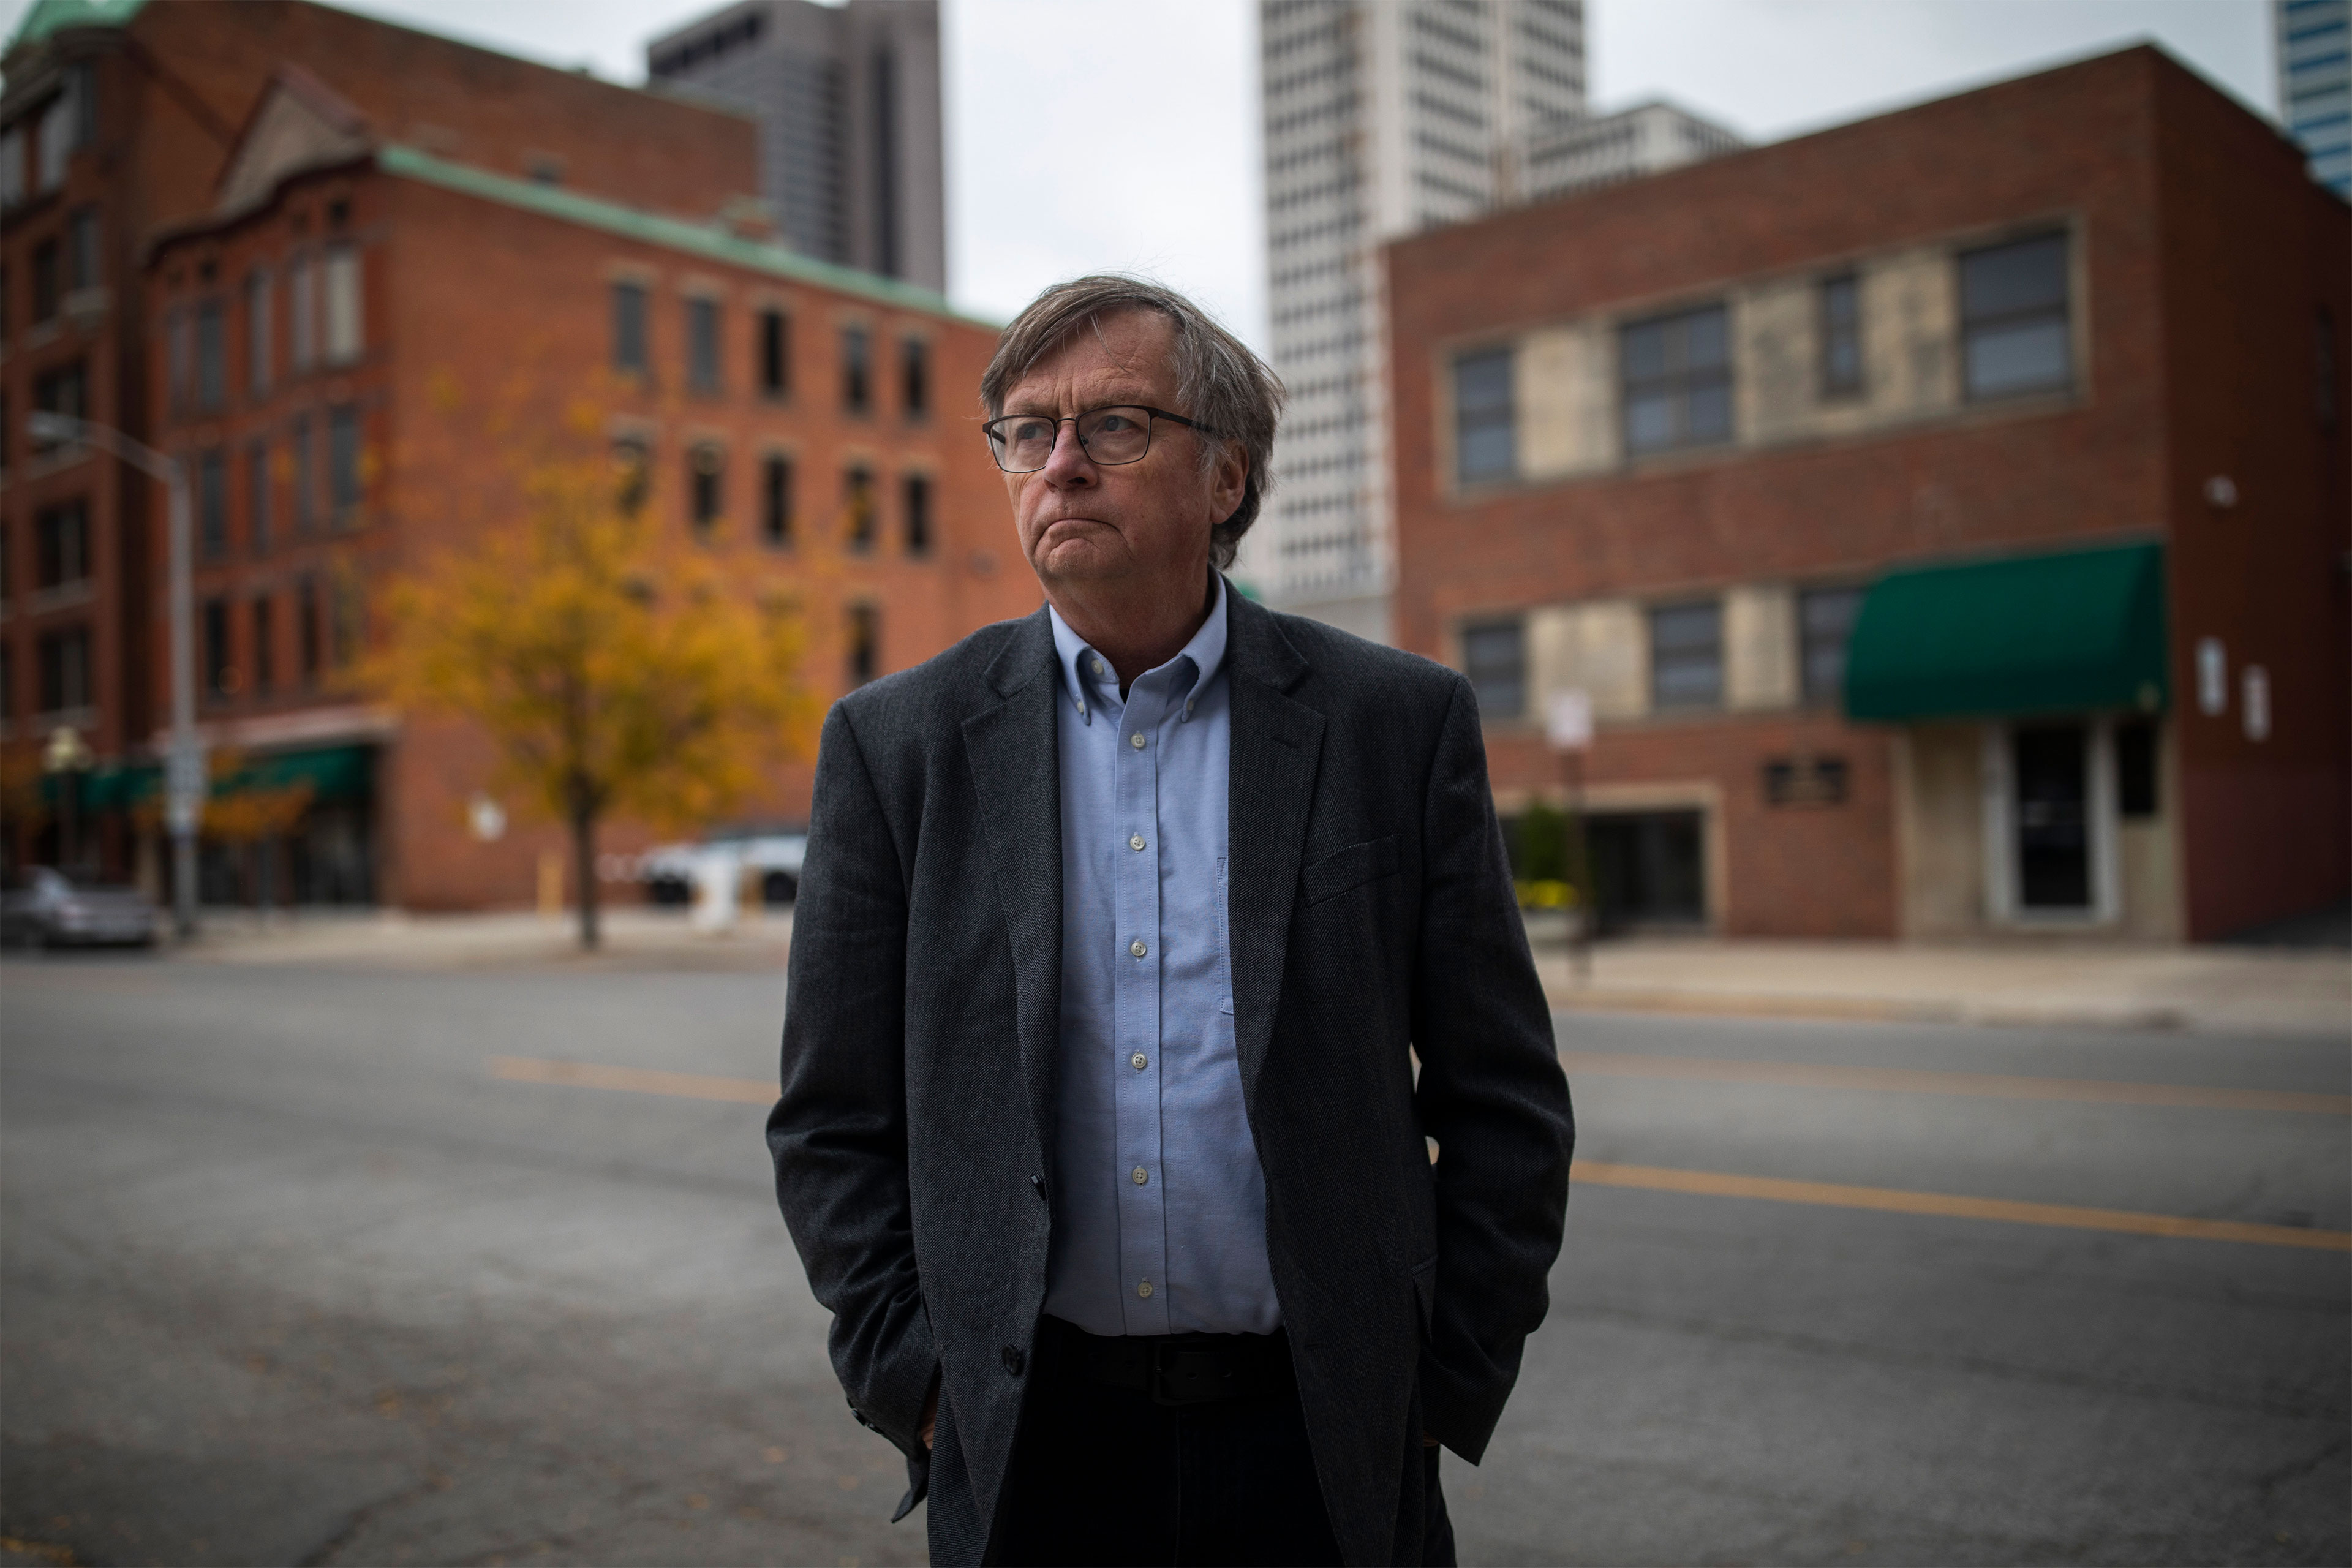 A middle-aged man in a dark grey suit with a light blue buttoned shirt stands on a city street looking to the left. He has a serious expression and wears glasses.